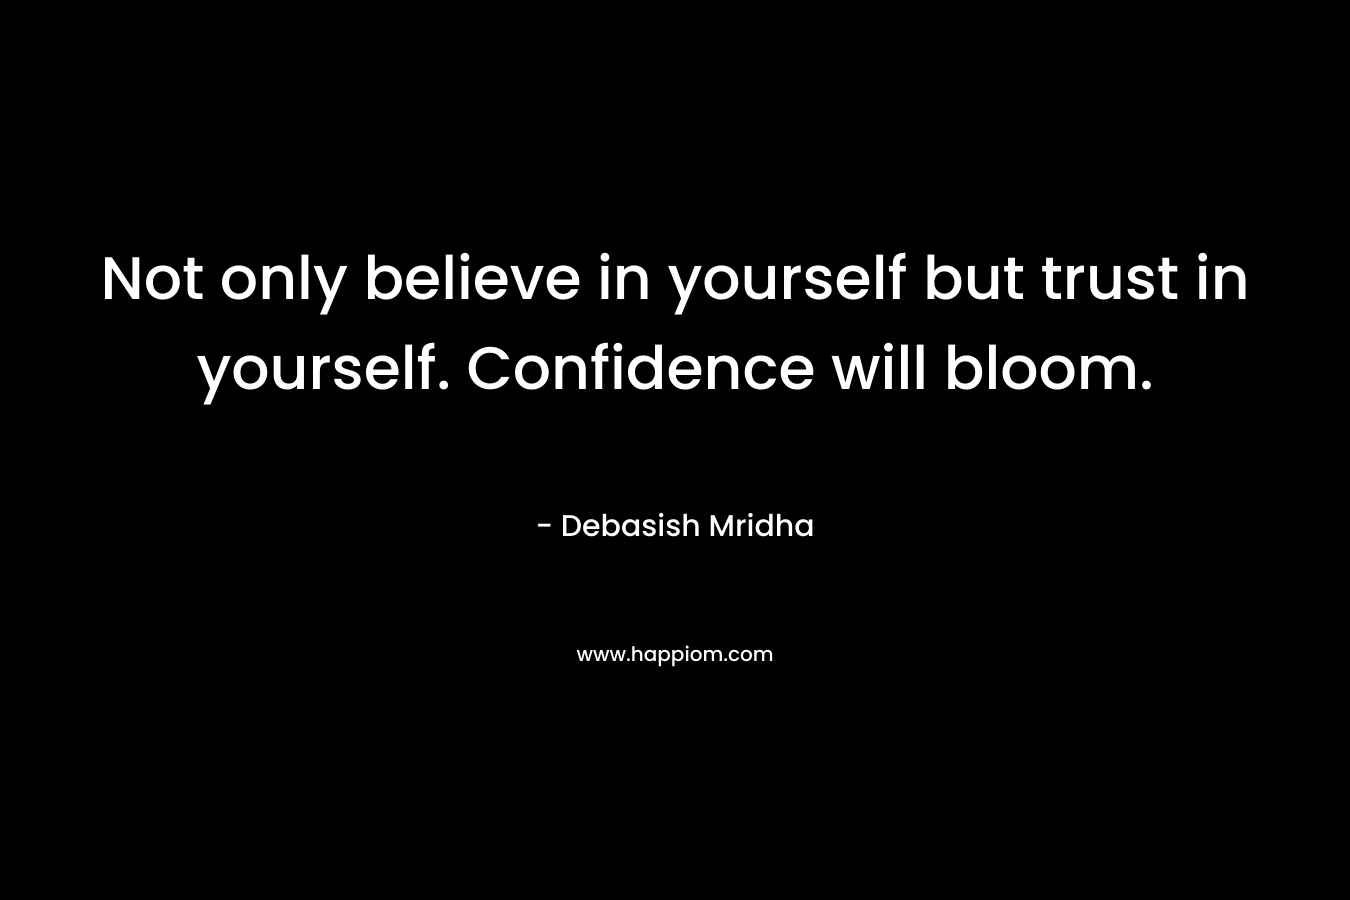 Not only believe in yourself but trust in yourself. Confidence will bloom.